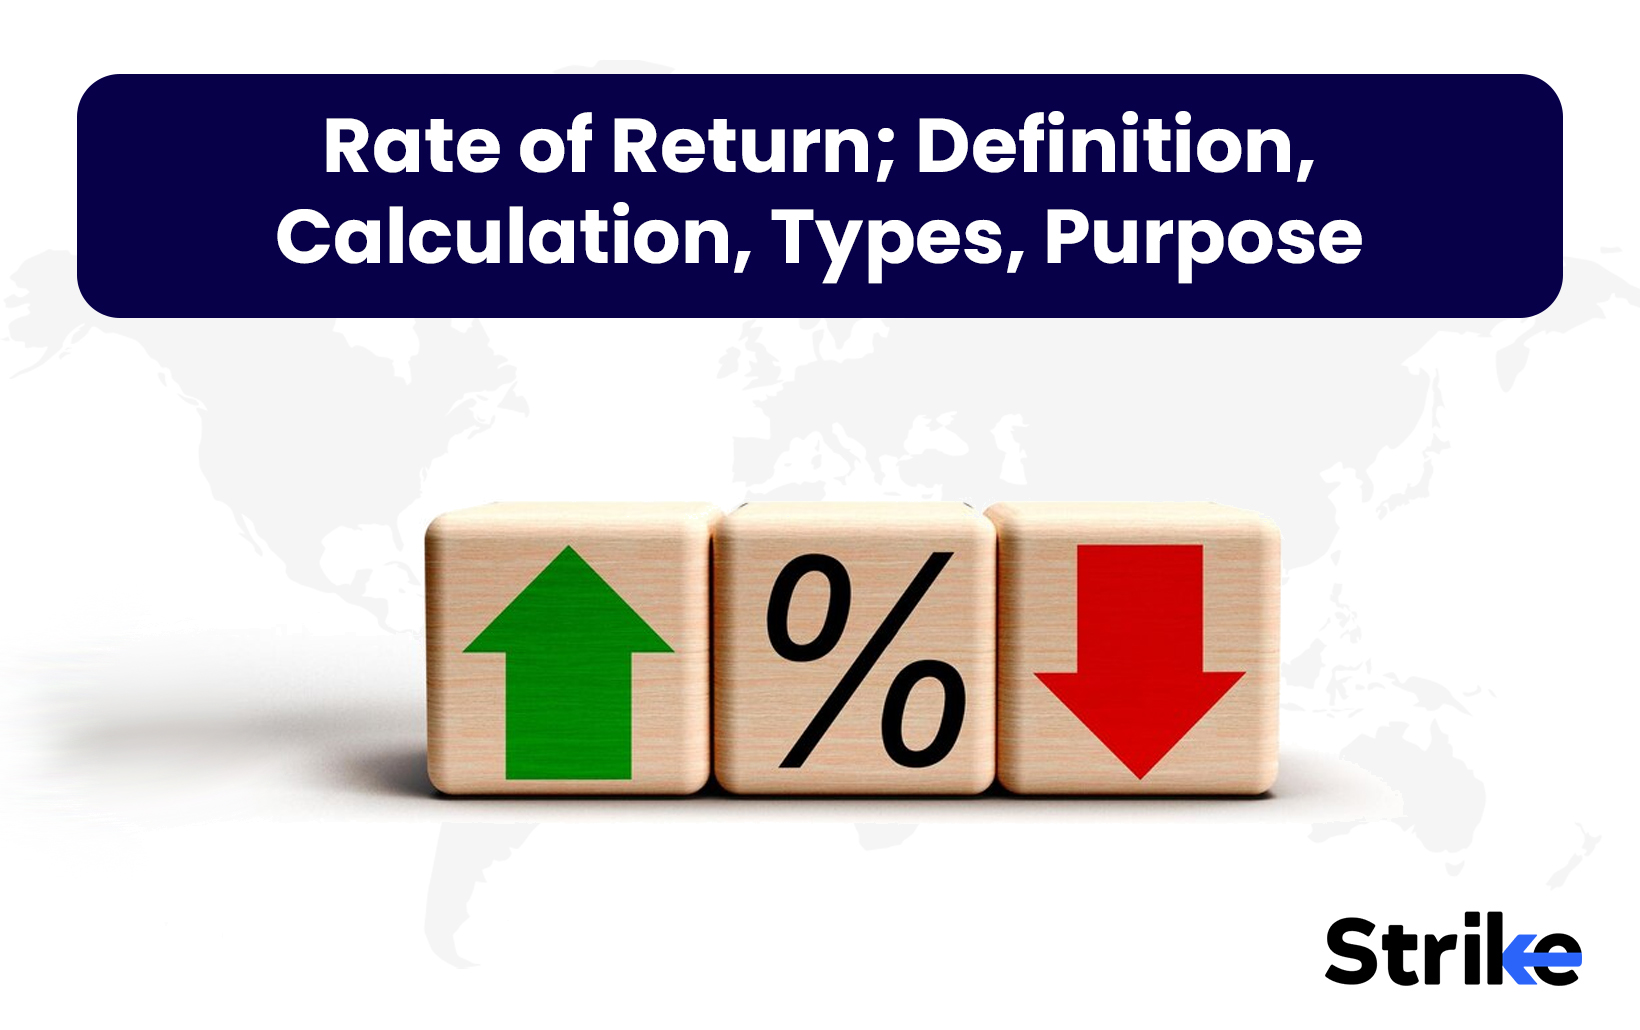 Rate of Return: Definition, Calculation, Types, Purpose